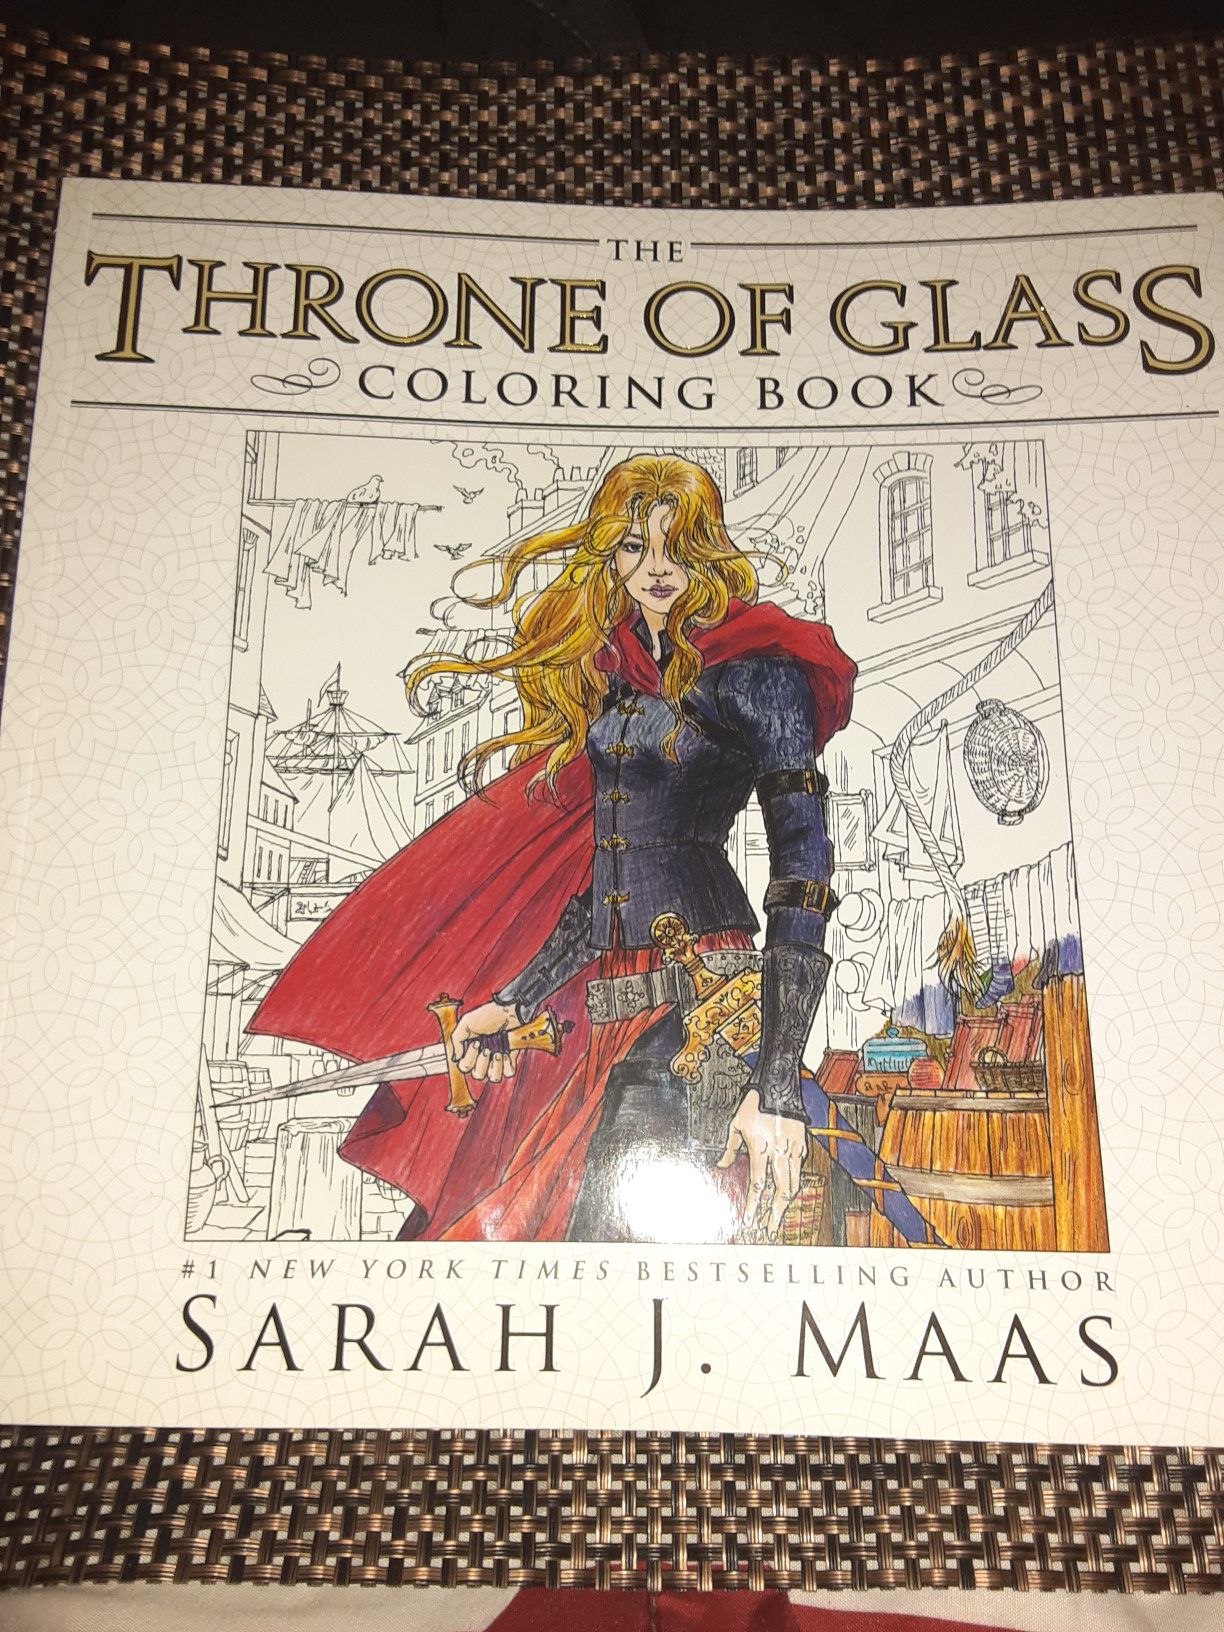 Throne of glass coloring book